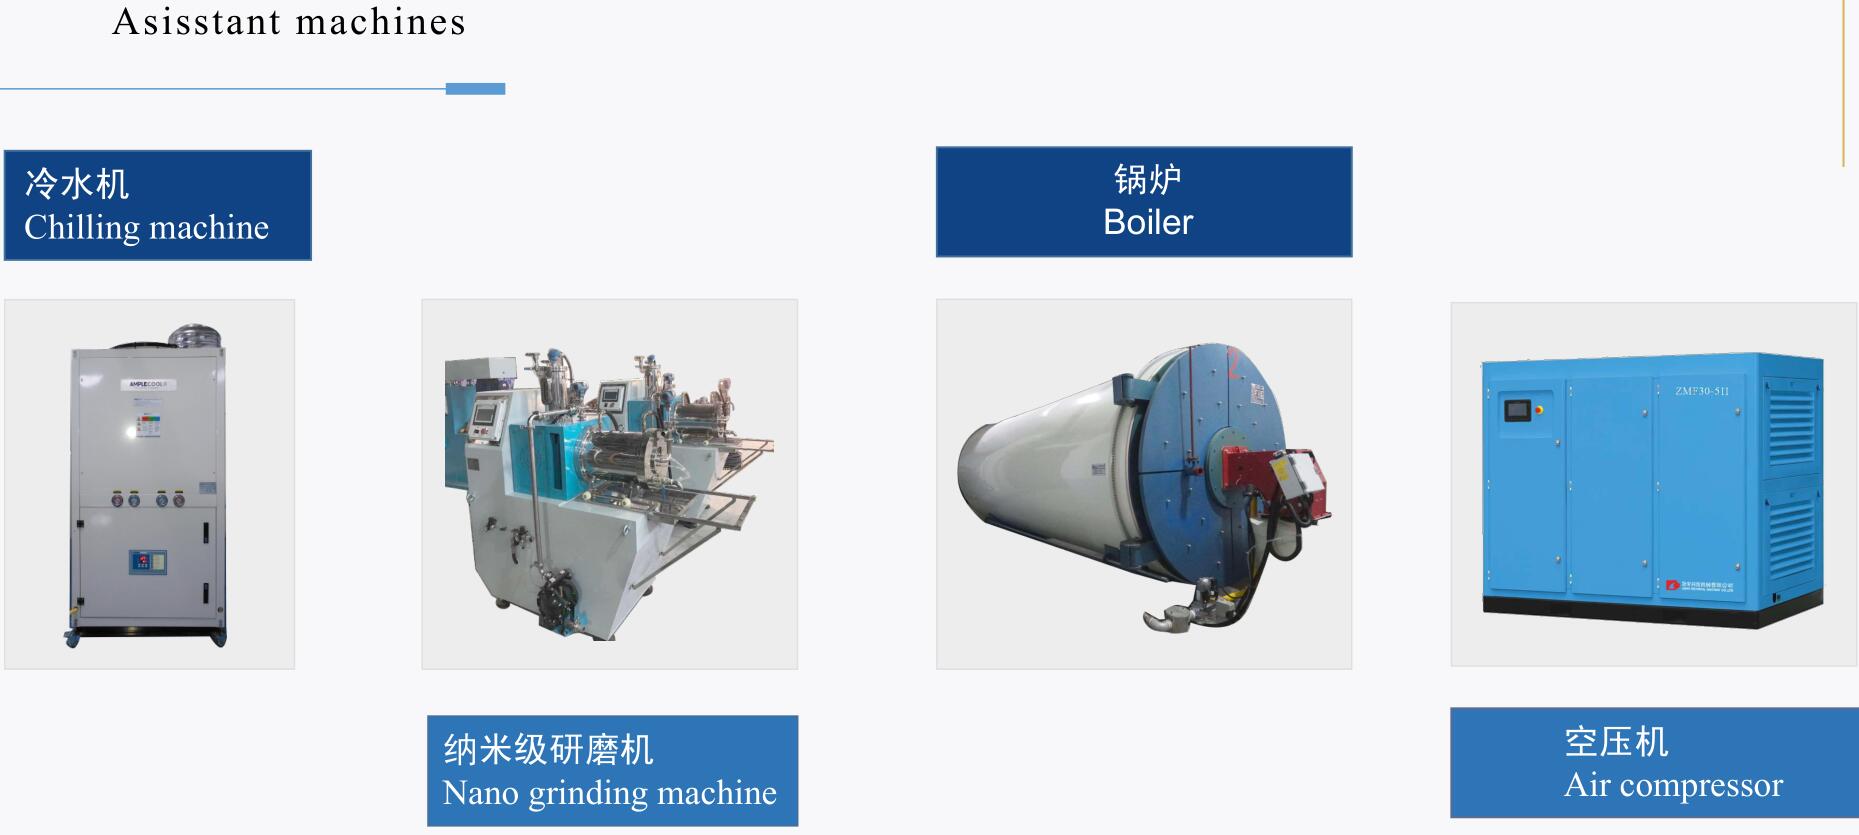 China best automatic nitrile gloves production line(图9)